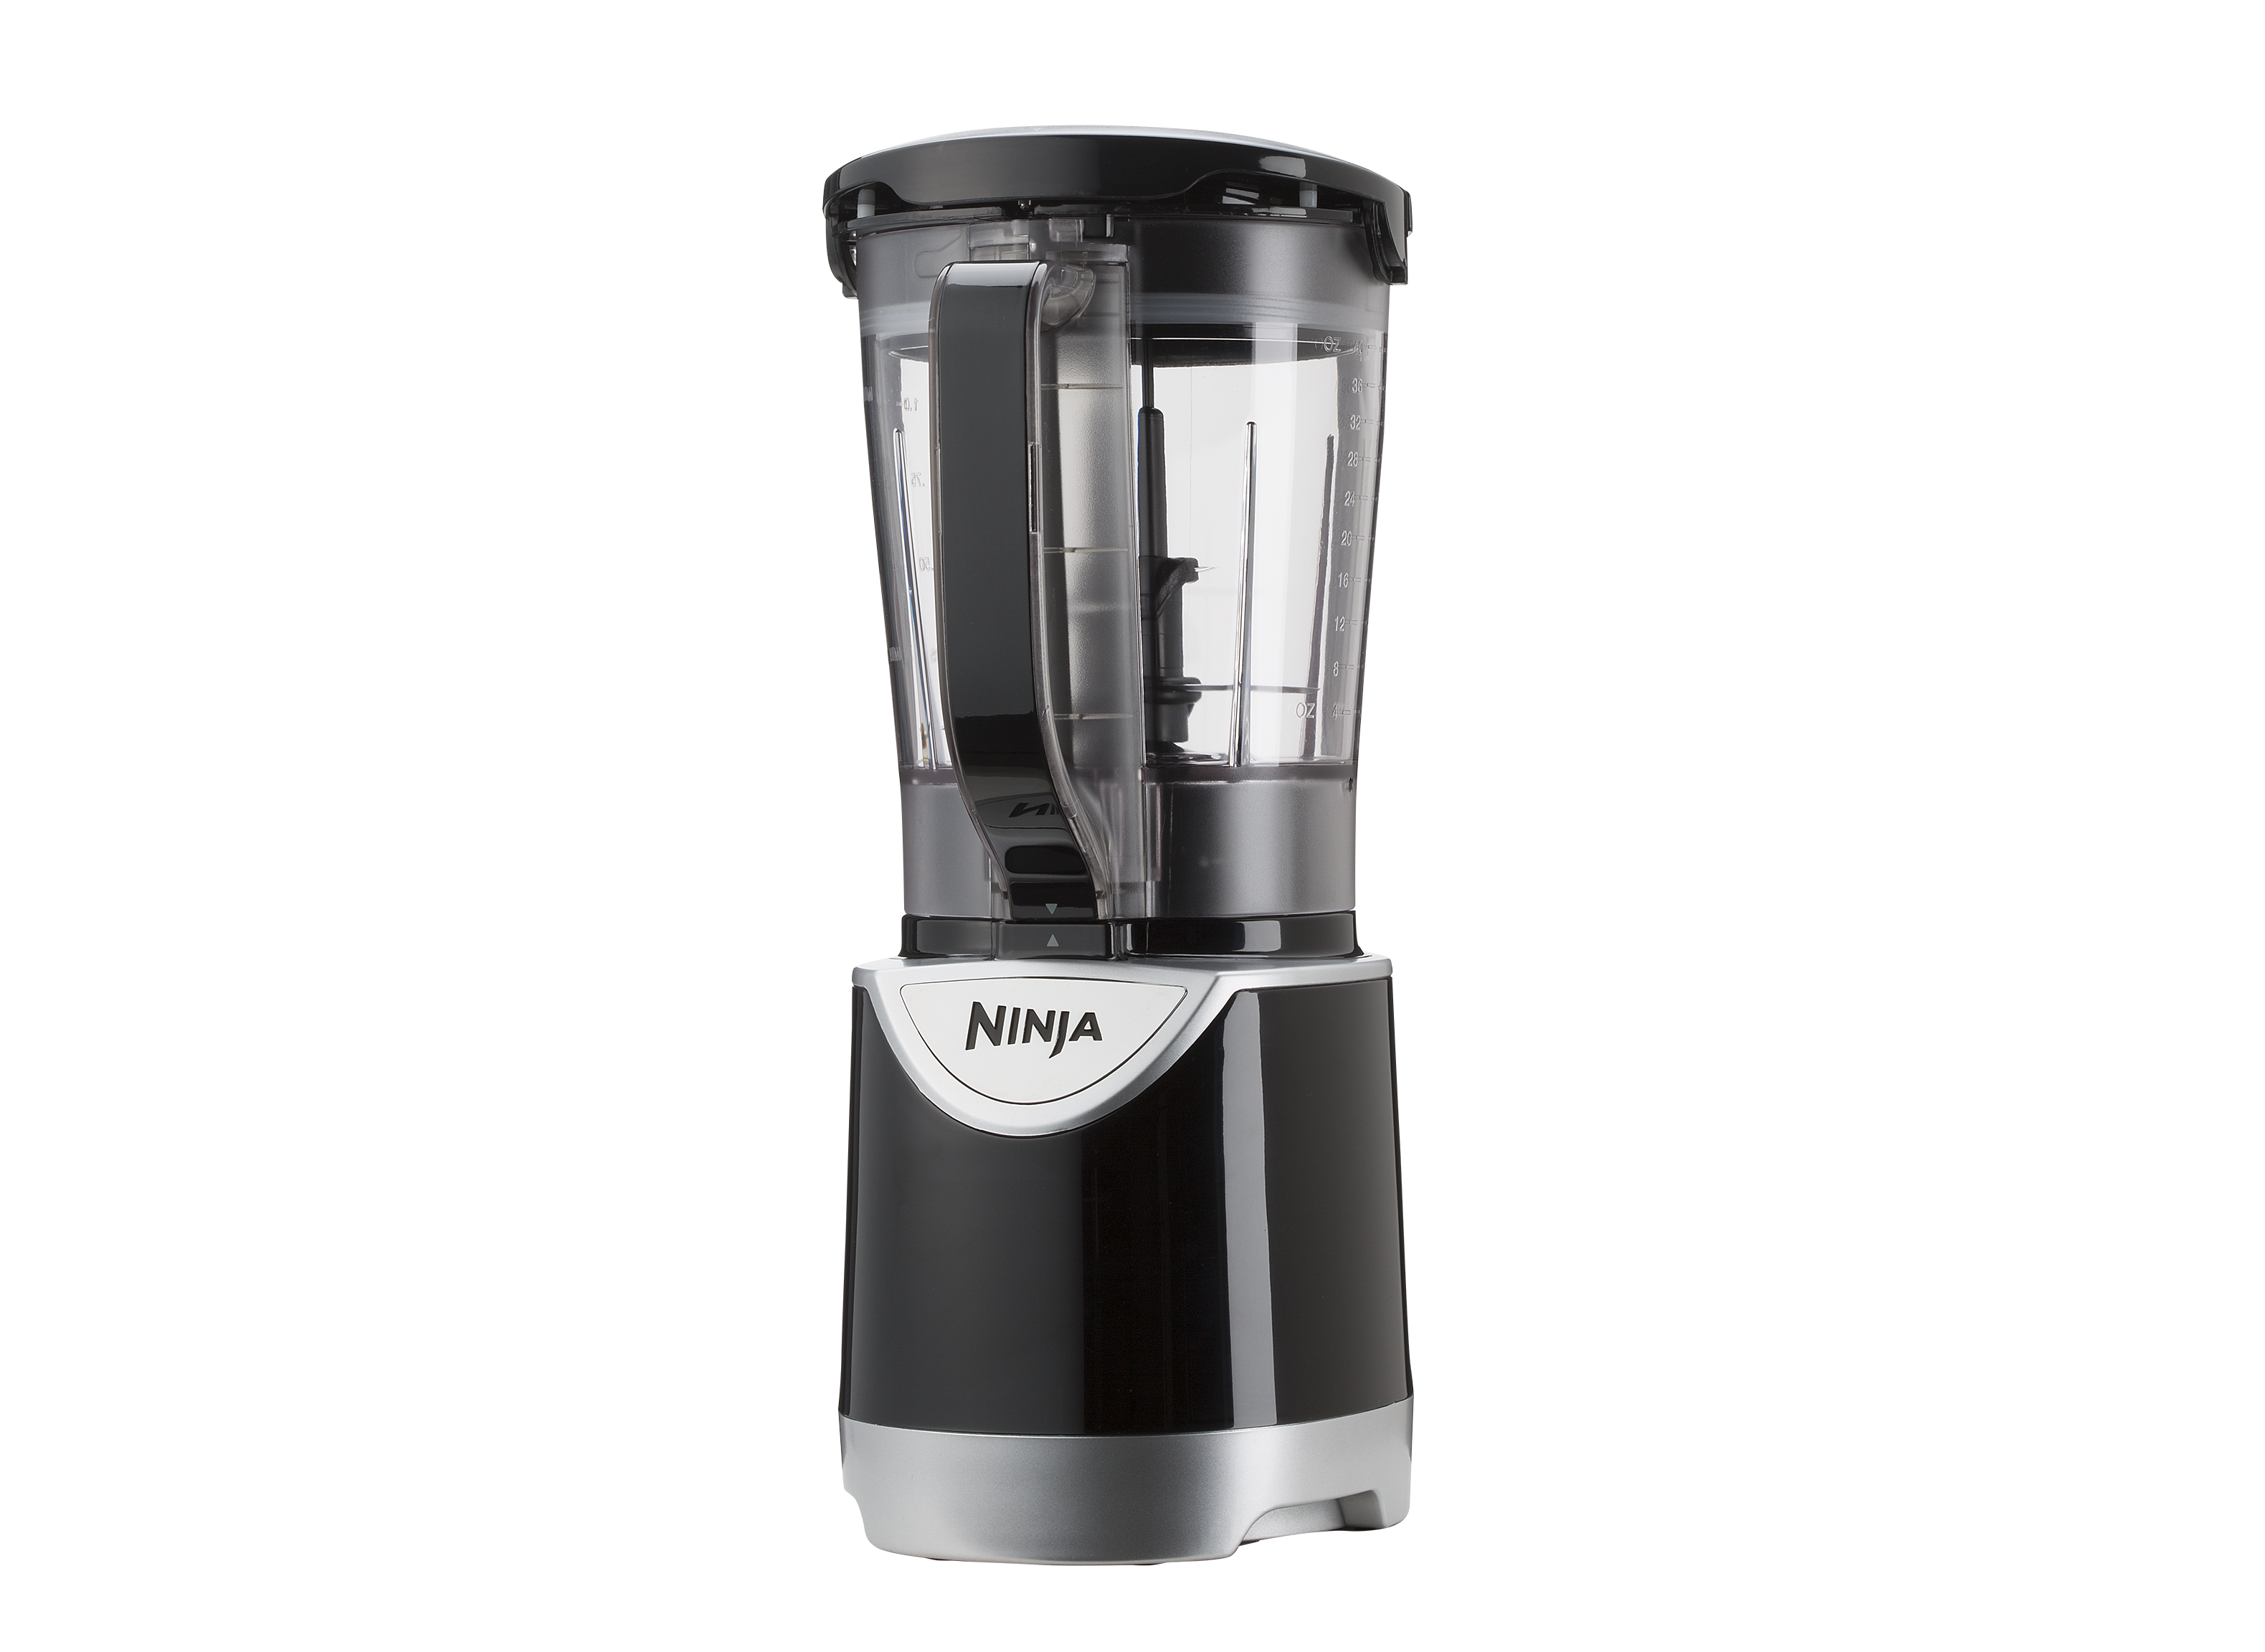 https://crdms.images.consumerreports.org/prod/products/cr/models/379157-foodprocessors-ninja-kitchensystembl201.png